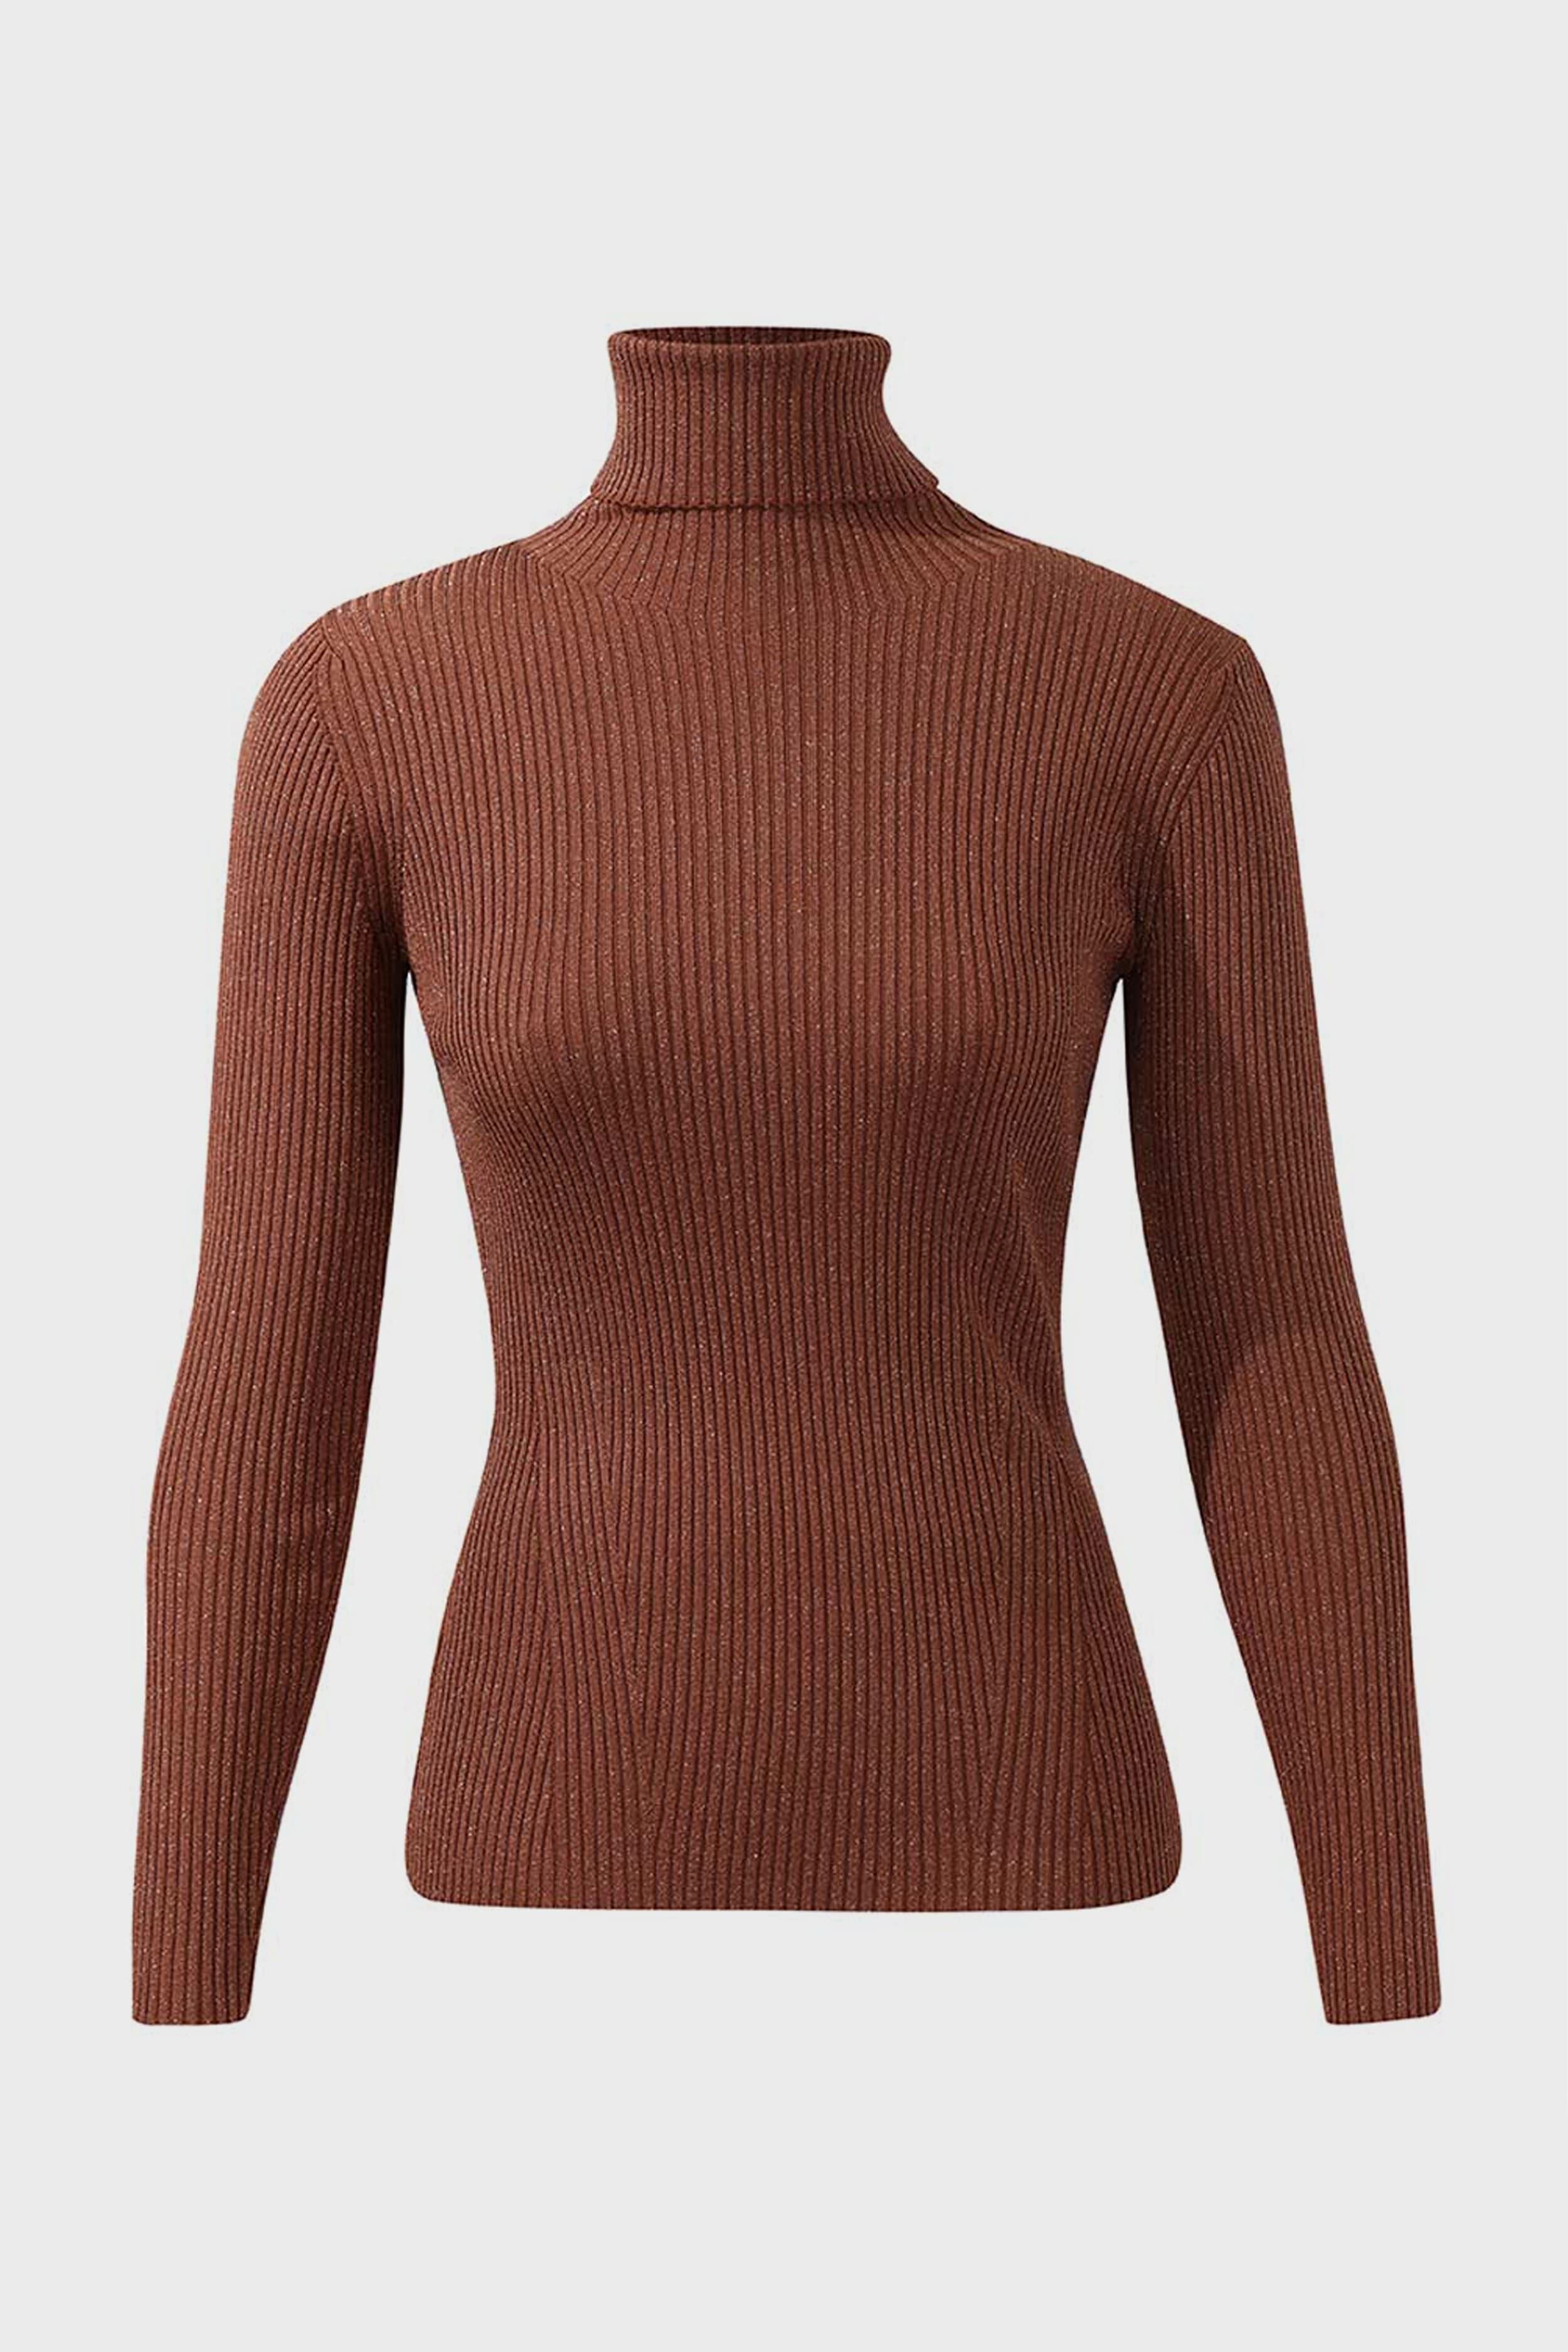 Ralph Lauren Red Ribbed Turtleneck Sweater New With Tags Womens Size Medium  Logo